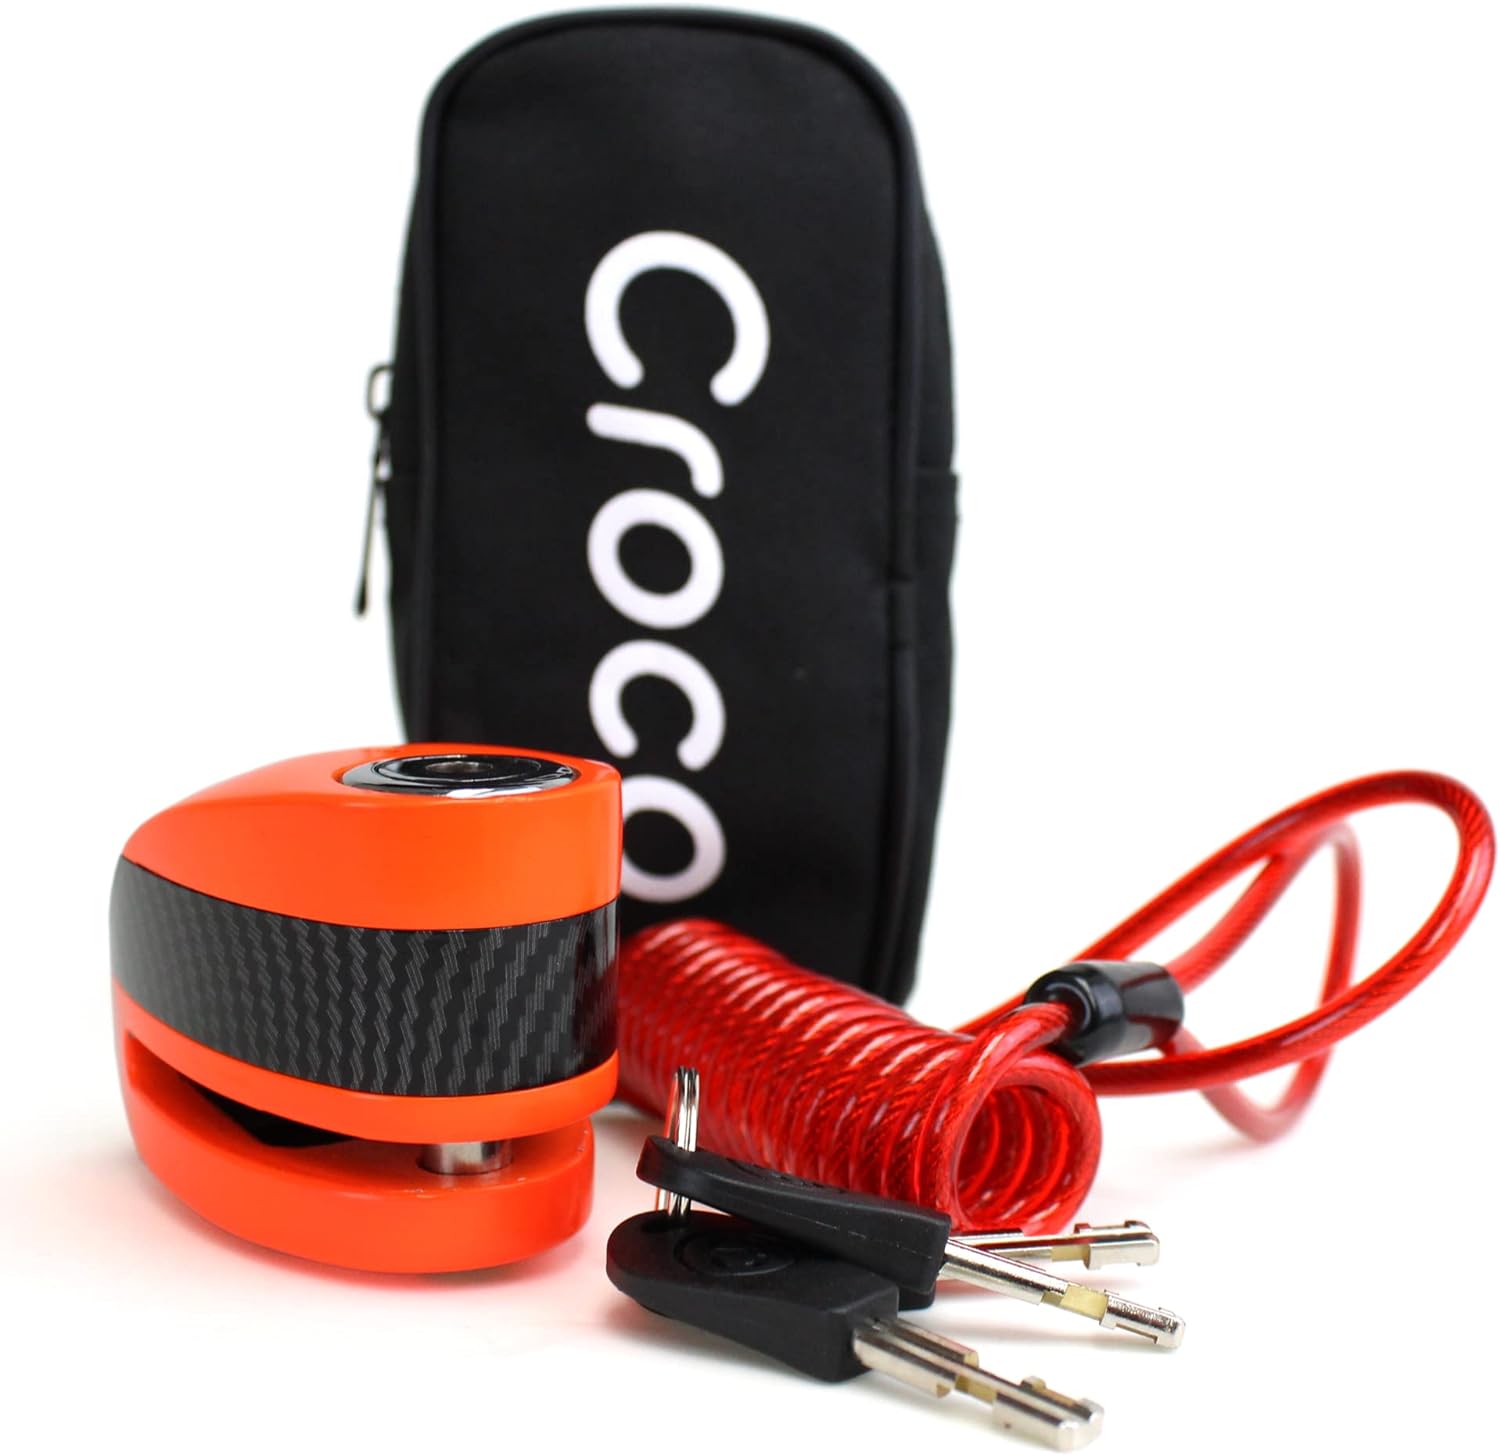 This image features a security product set against a white background. The set includes an orange and black disc lock with a 130 dB alarm, prominently featured in the foreground. To the left, a black carrying case with the word "Croco" in white letters provides a portable storage option. Accompanying the lock is a red coiled reminder cable, designed to prevent ride-away thefts by reminding the user to remove the lock before starting. Also included are three keys, which appear to fit the disc lock. 